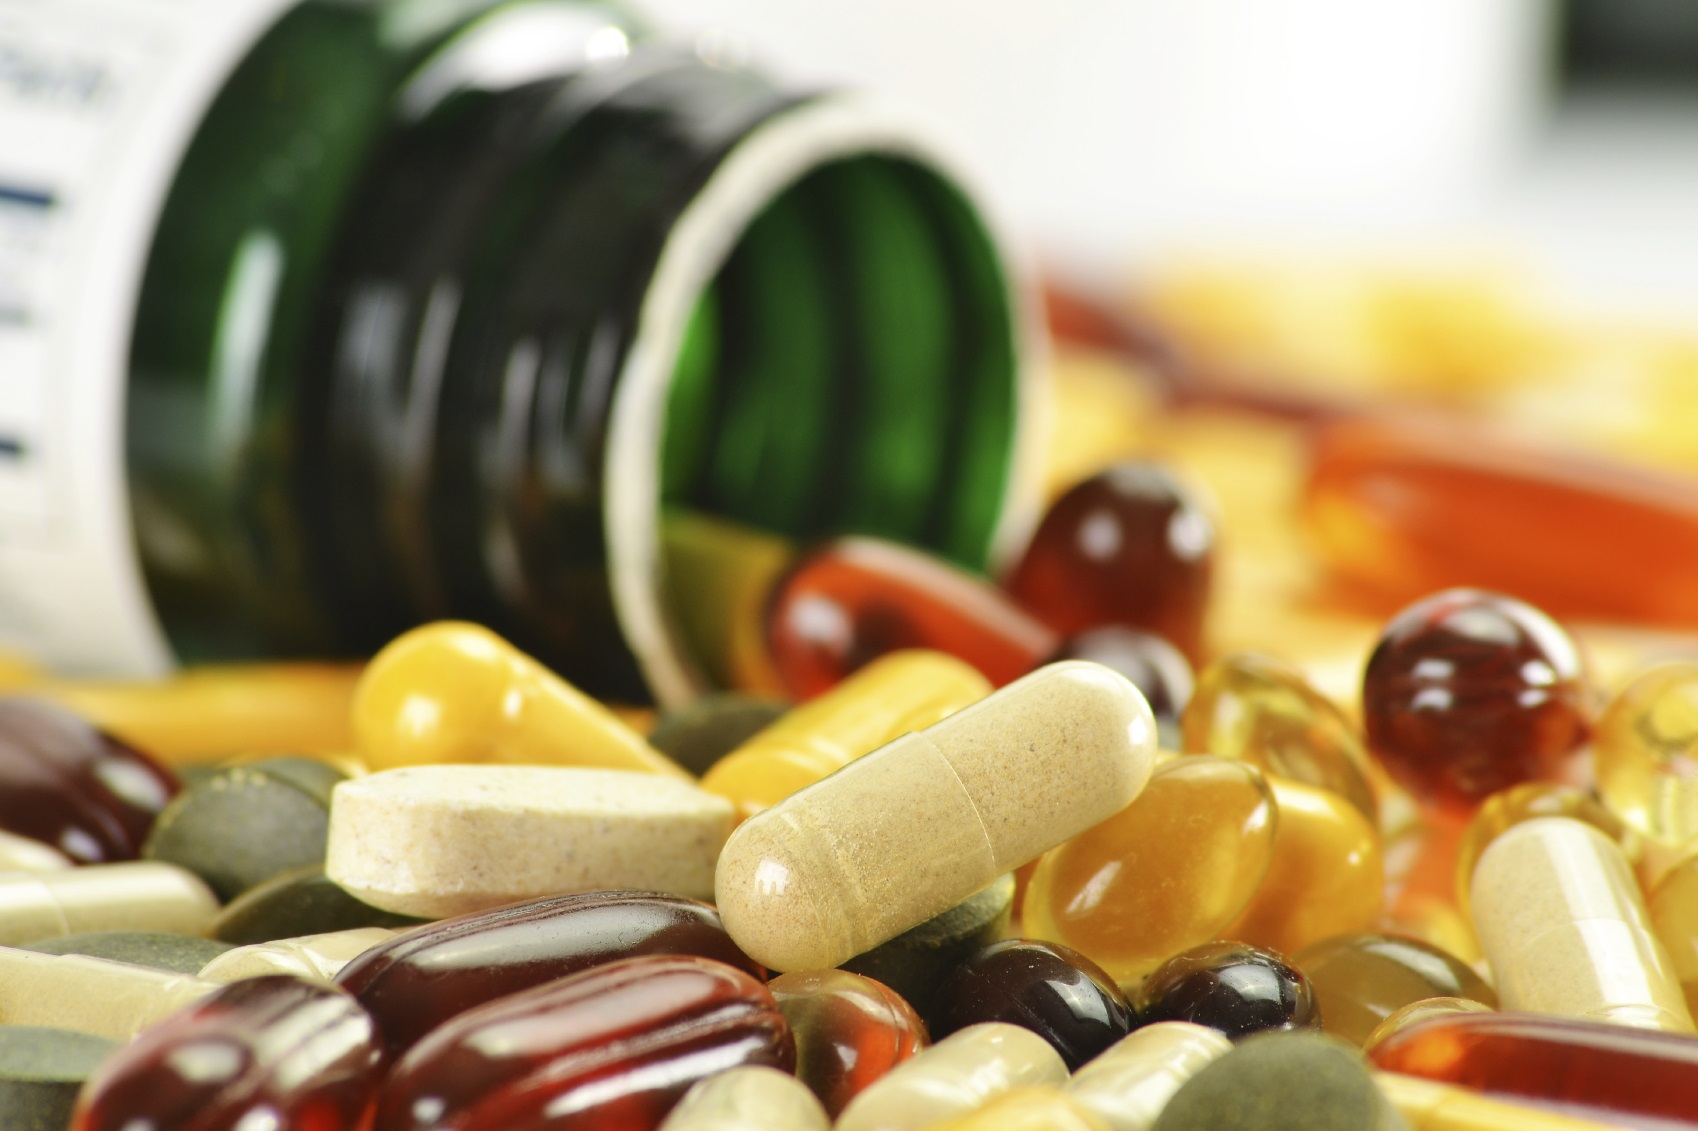 Best Supplements To Slow Aging Recommended By Dietitians- Here Is What You Should Know